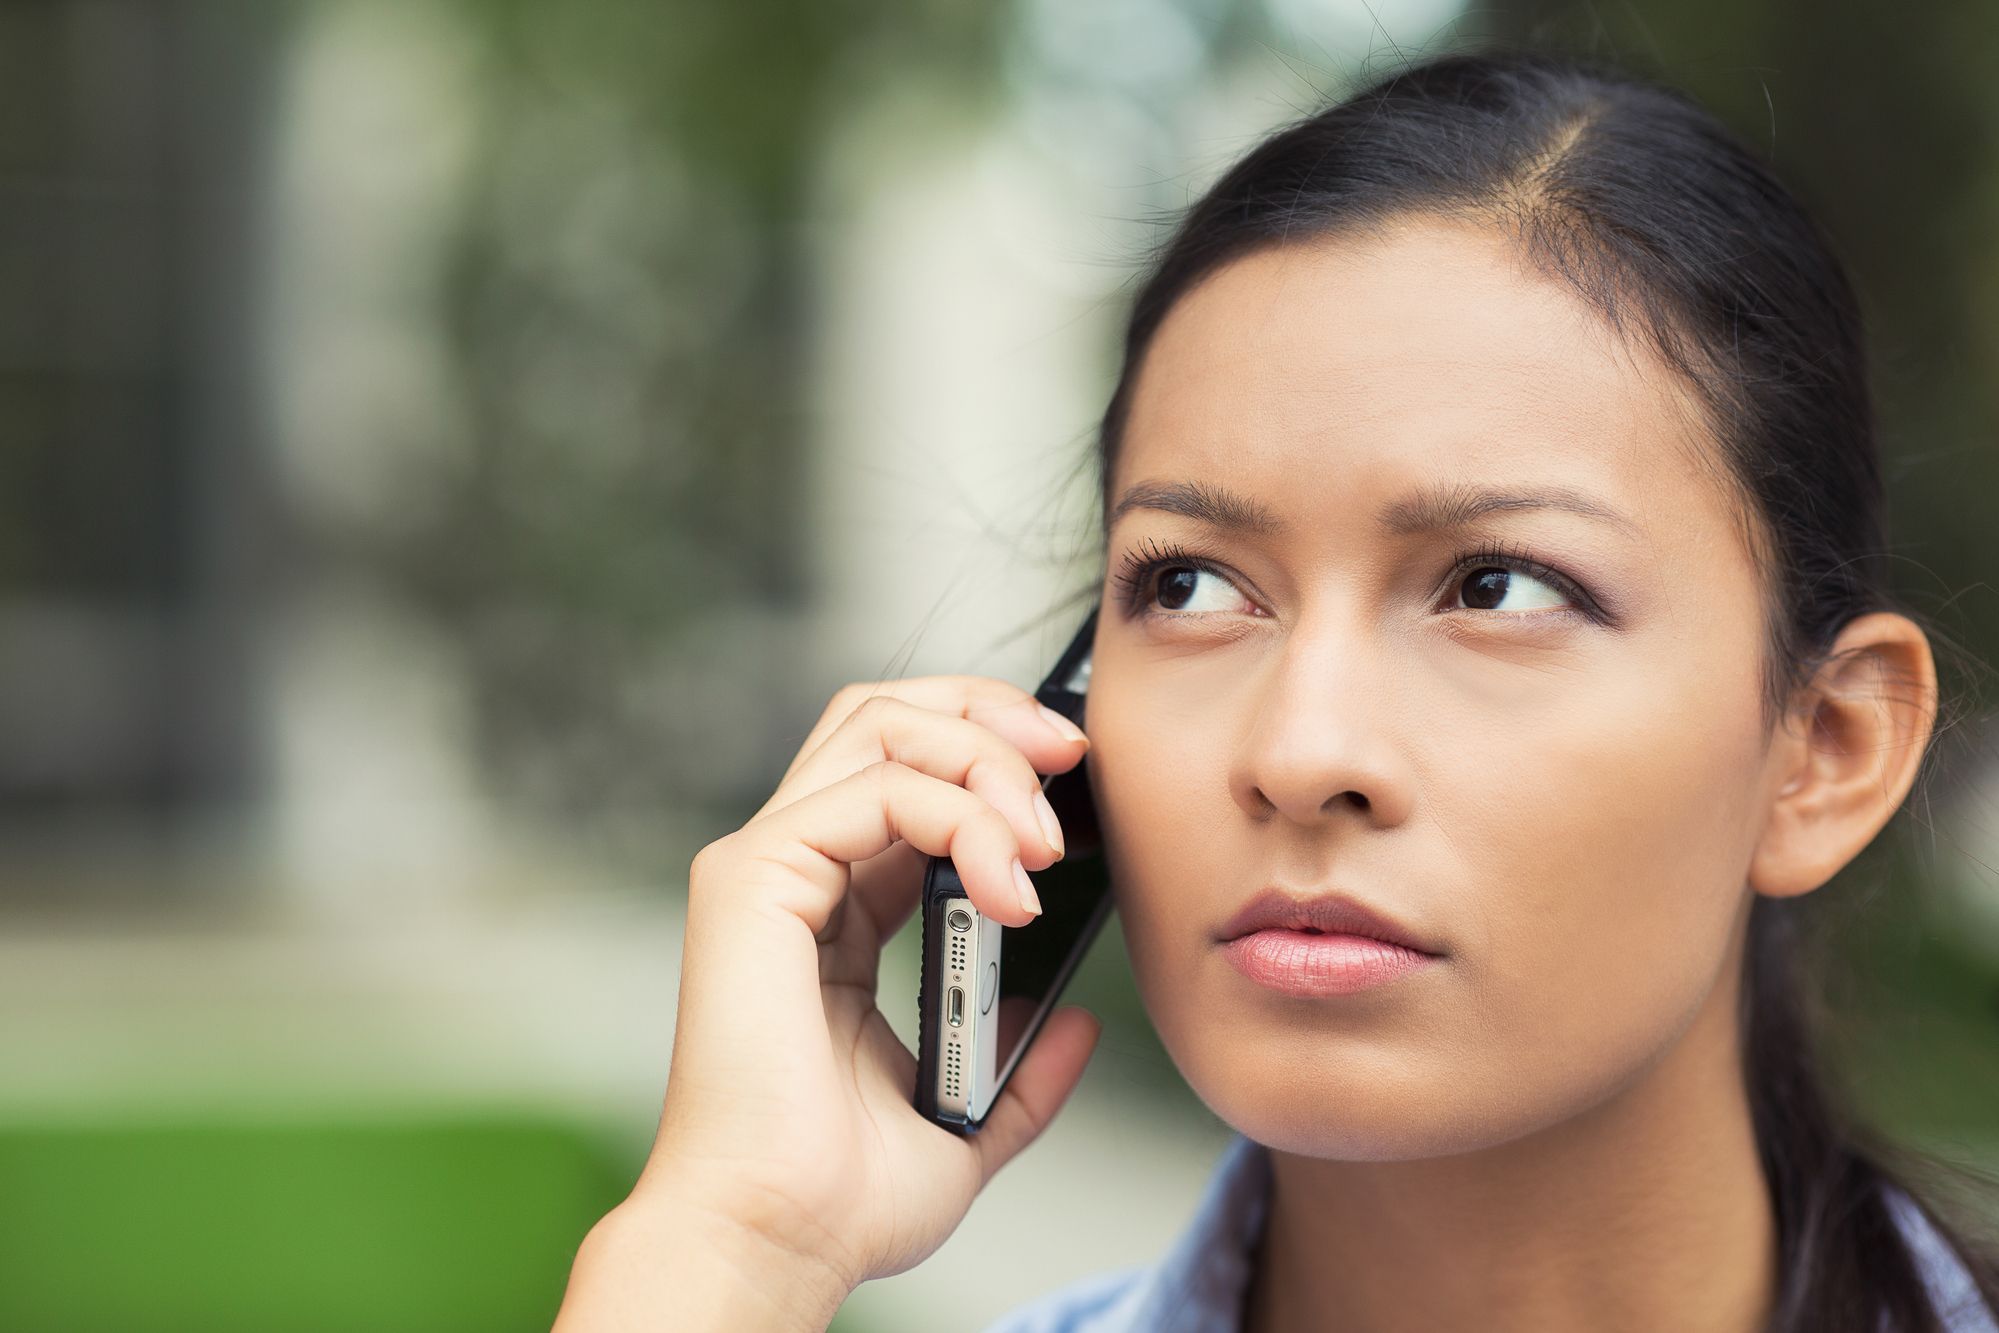 Do you know what a telemarketing auto dialer does?